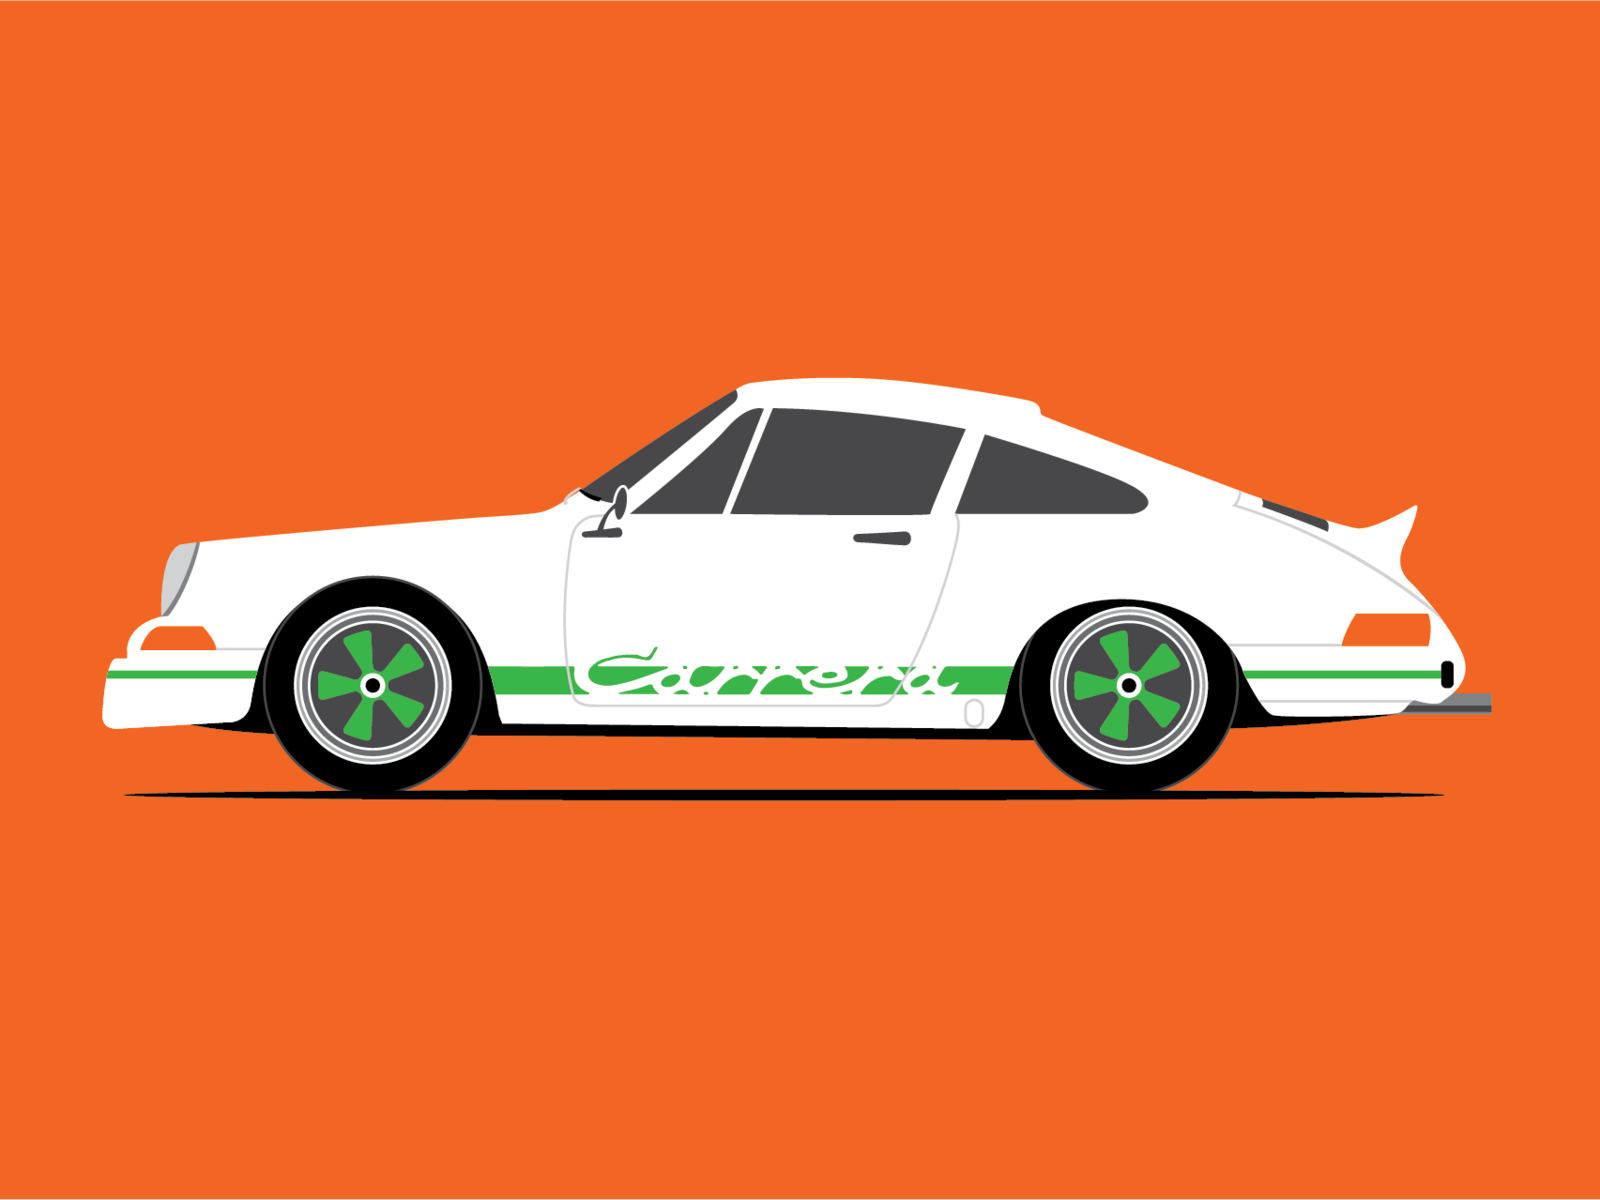 1973 Porsche 911 Carrera RS  Vector by Caleb Brown on Dribbble